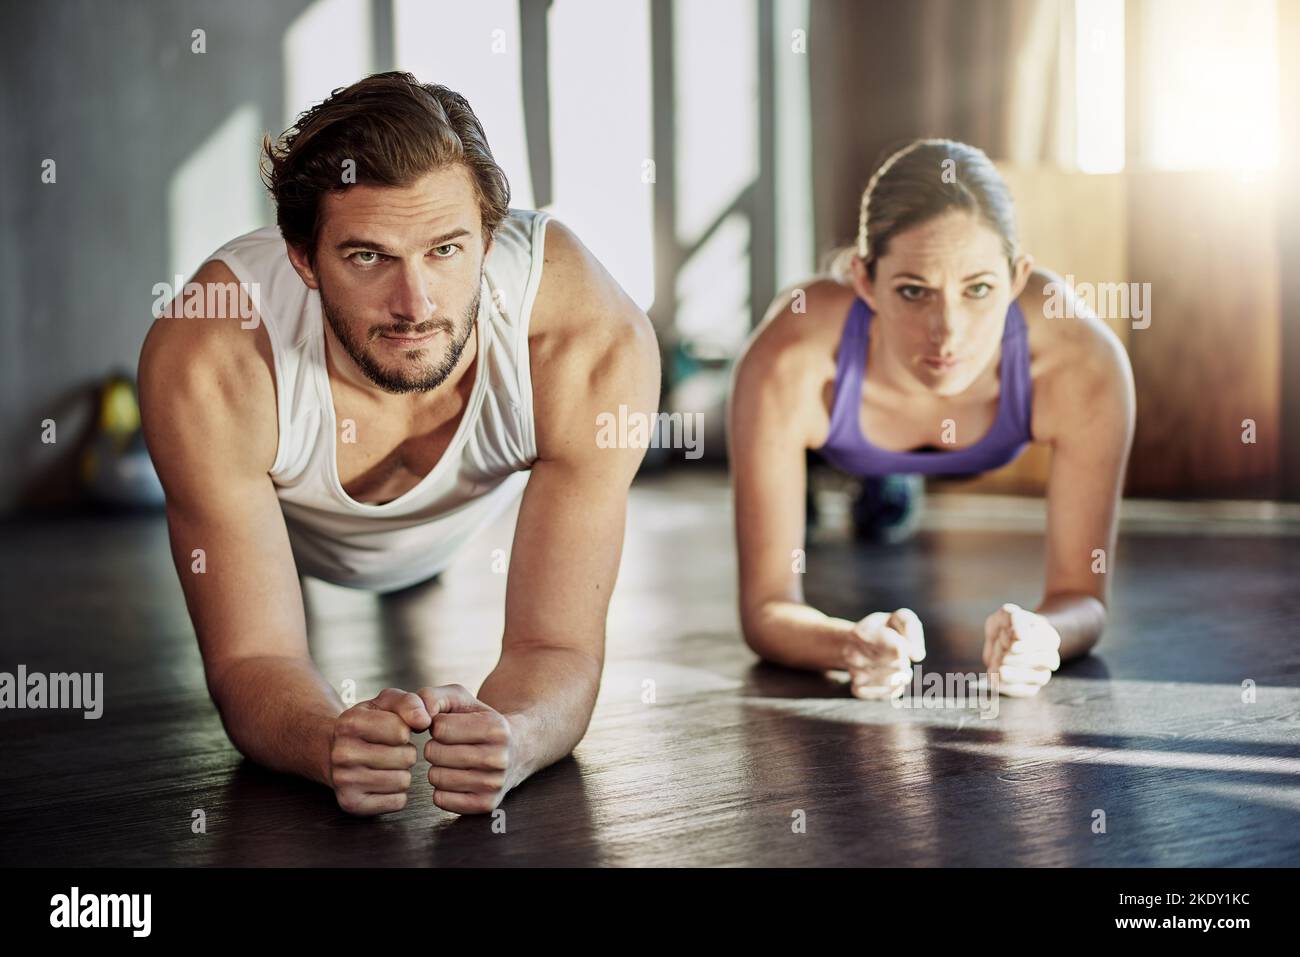 Seeing who can hold it the longest. two young people planking together as part of their workout. Stock Photo